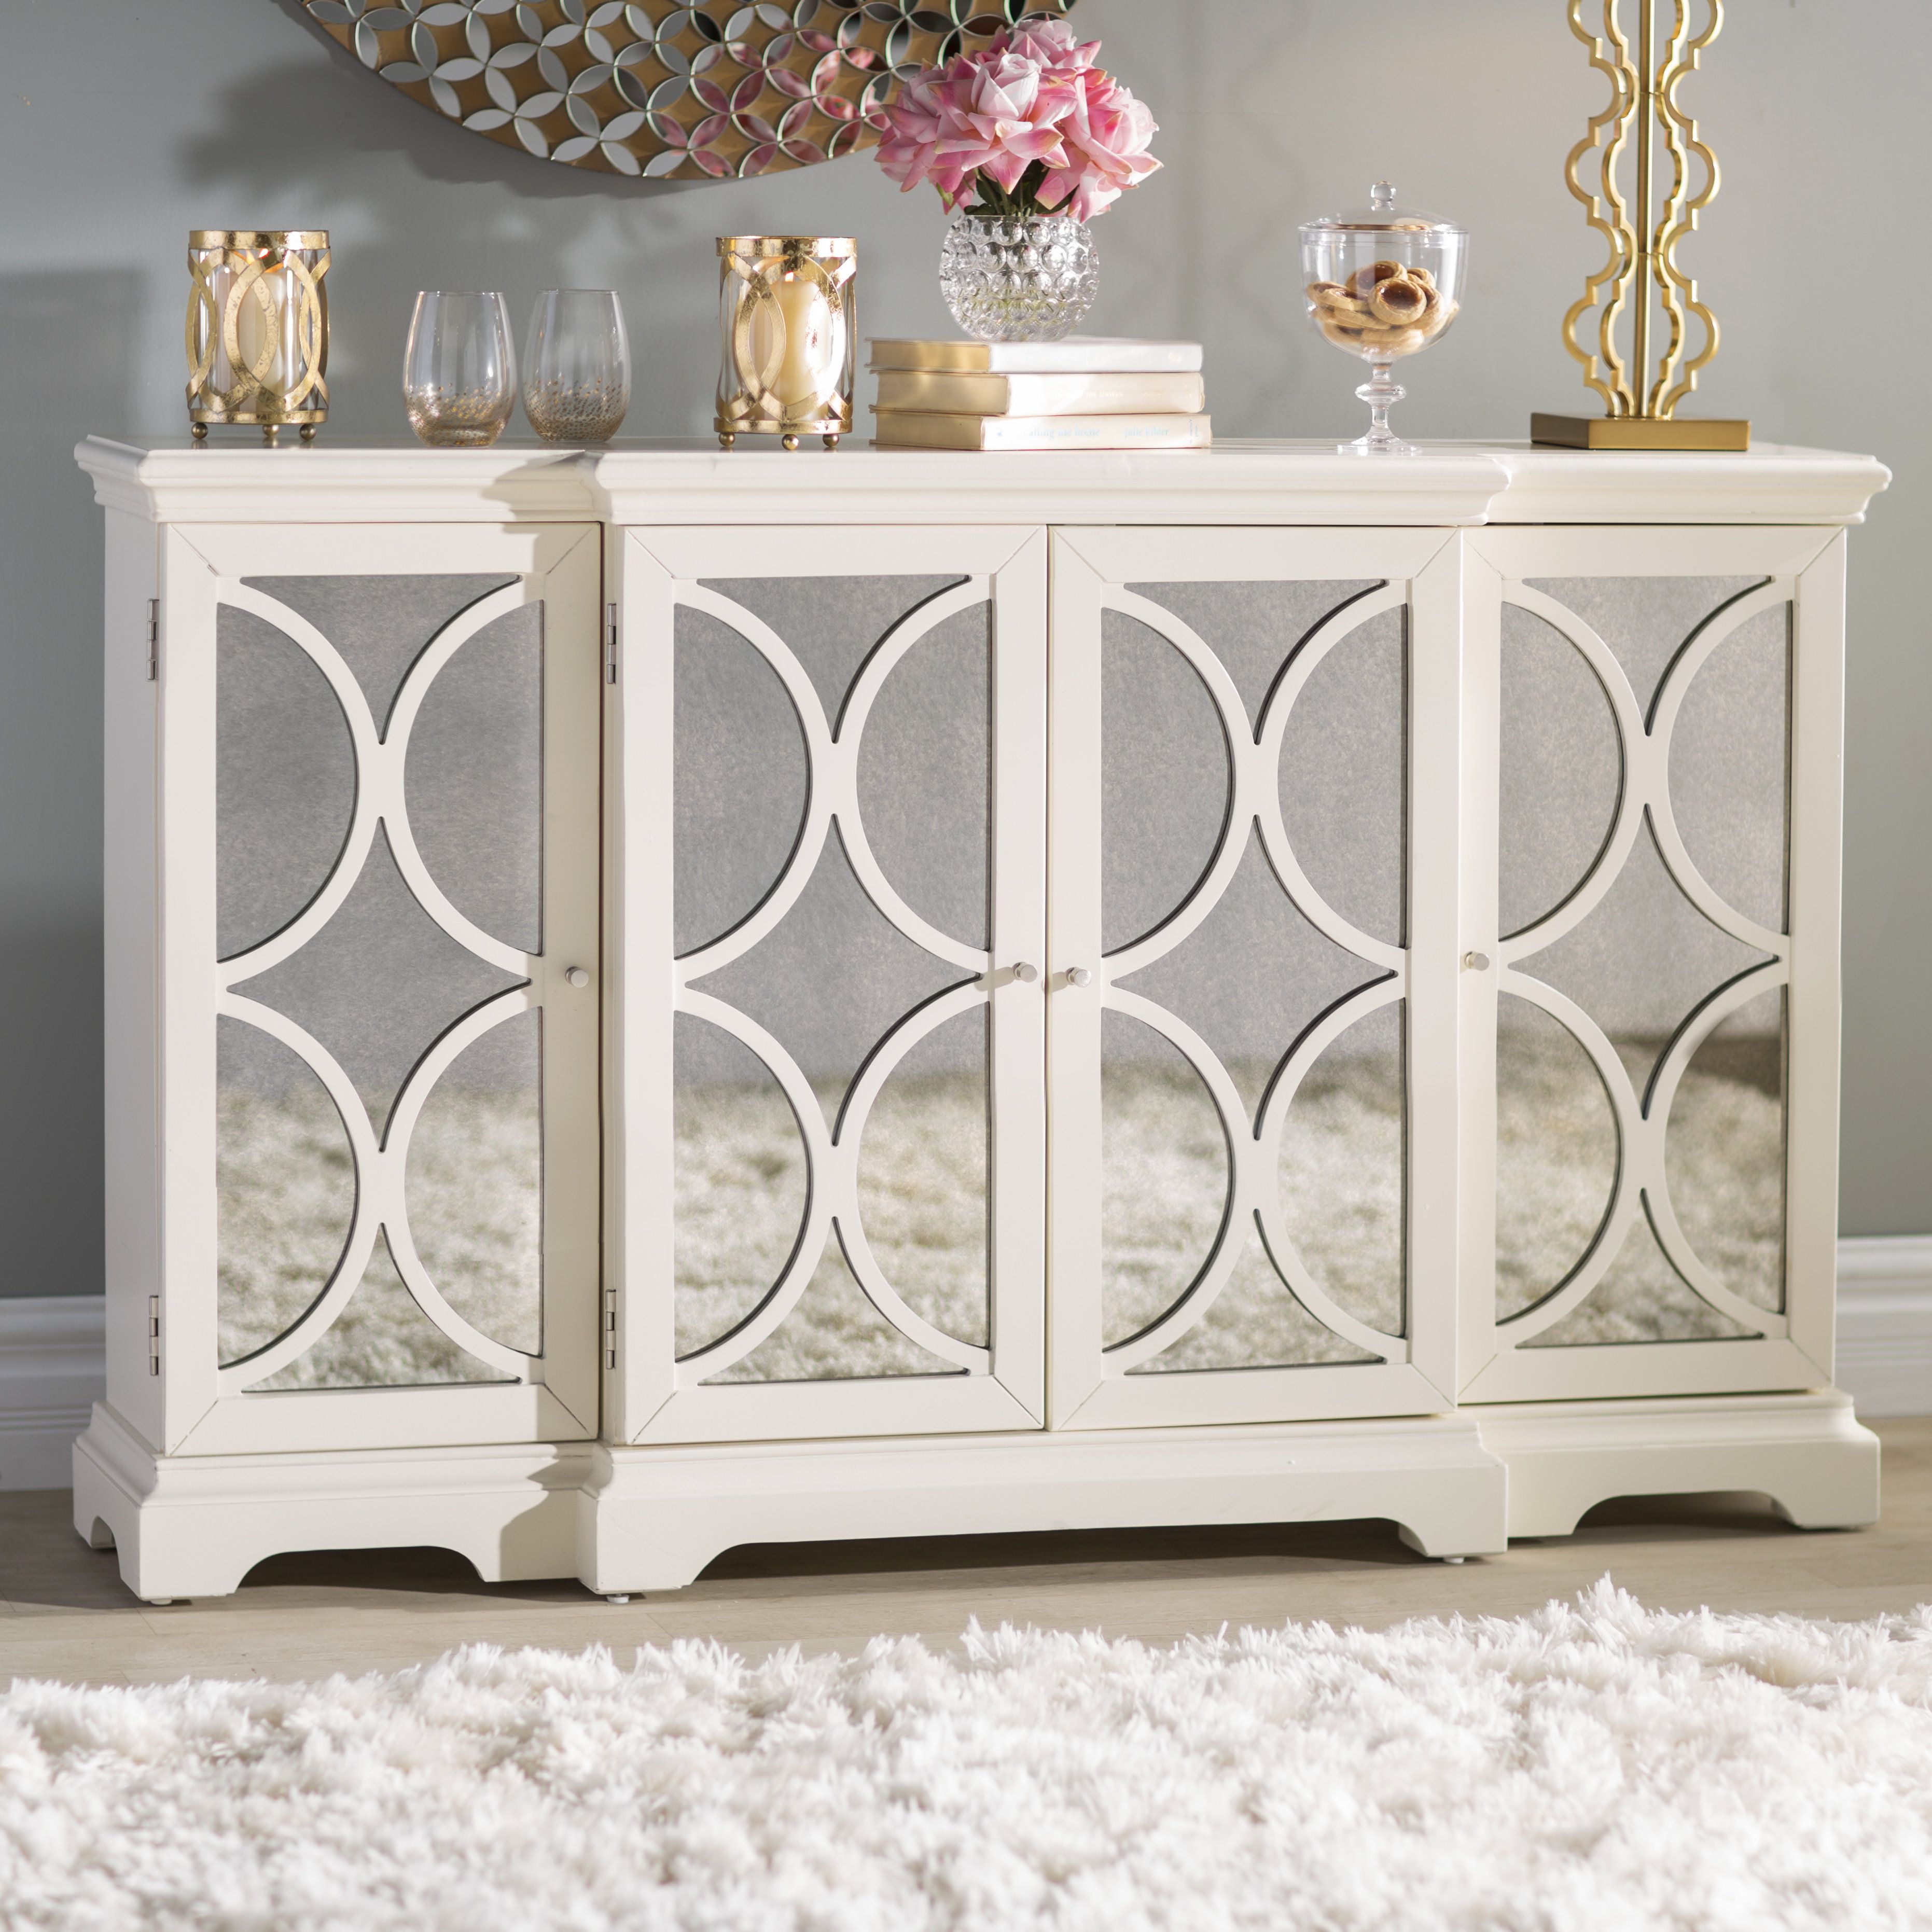 60 Inch Credenza | Wayfair Inside Latest Lainey Credenzas (View 18 of 20)